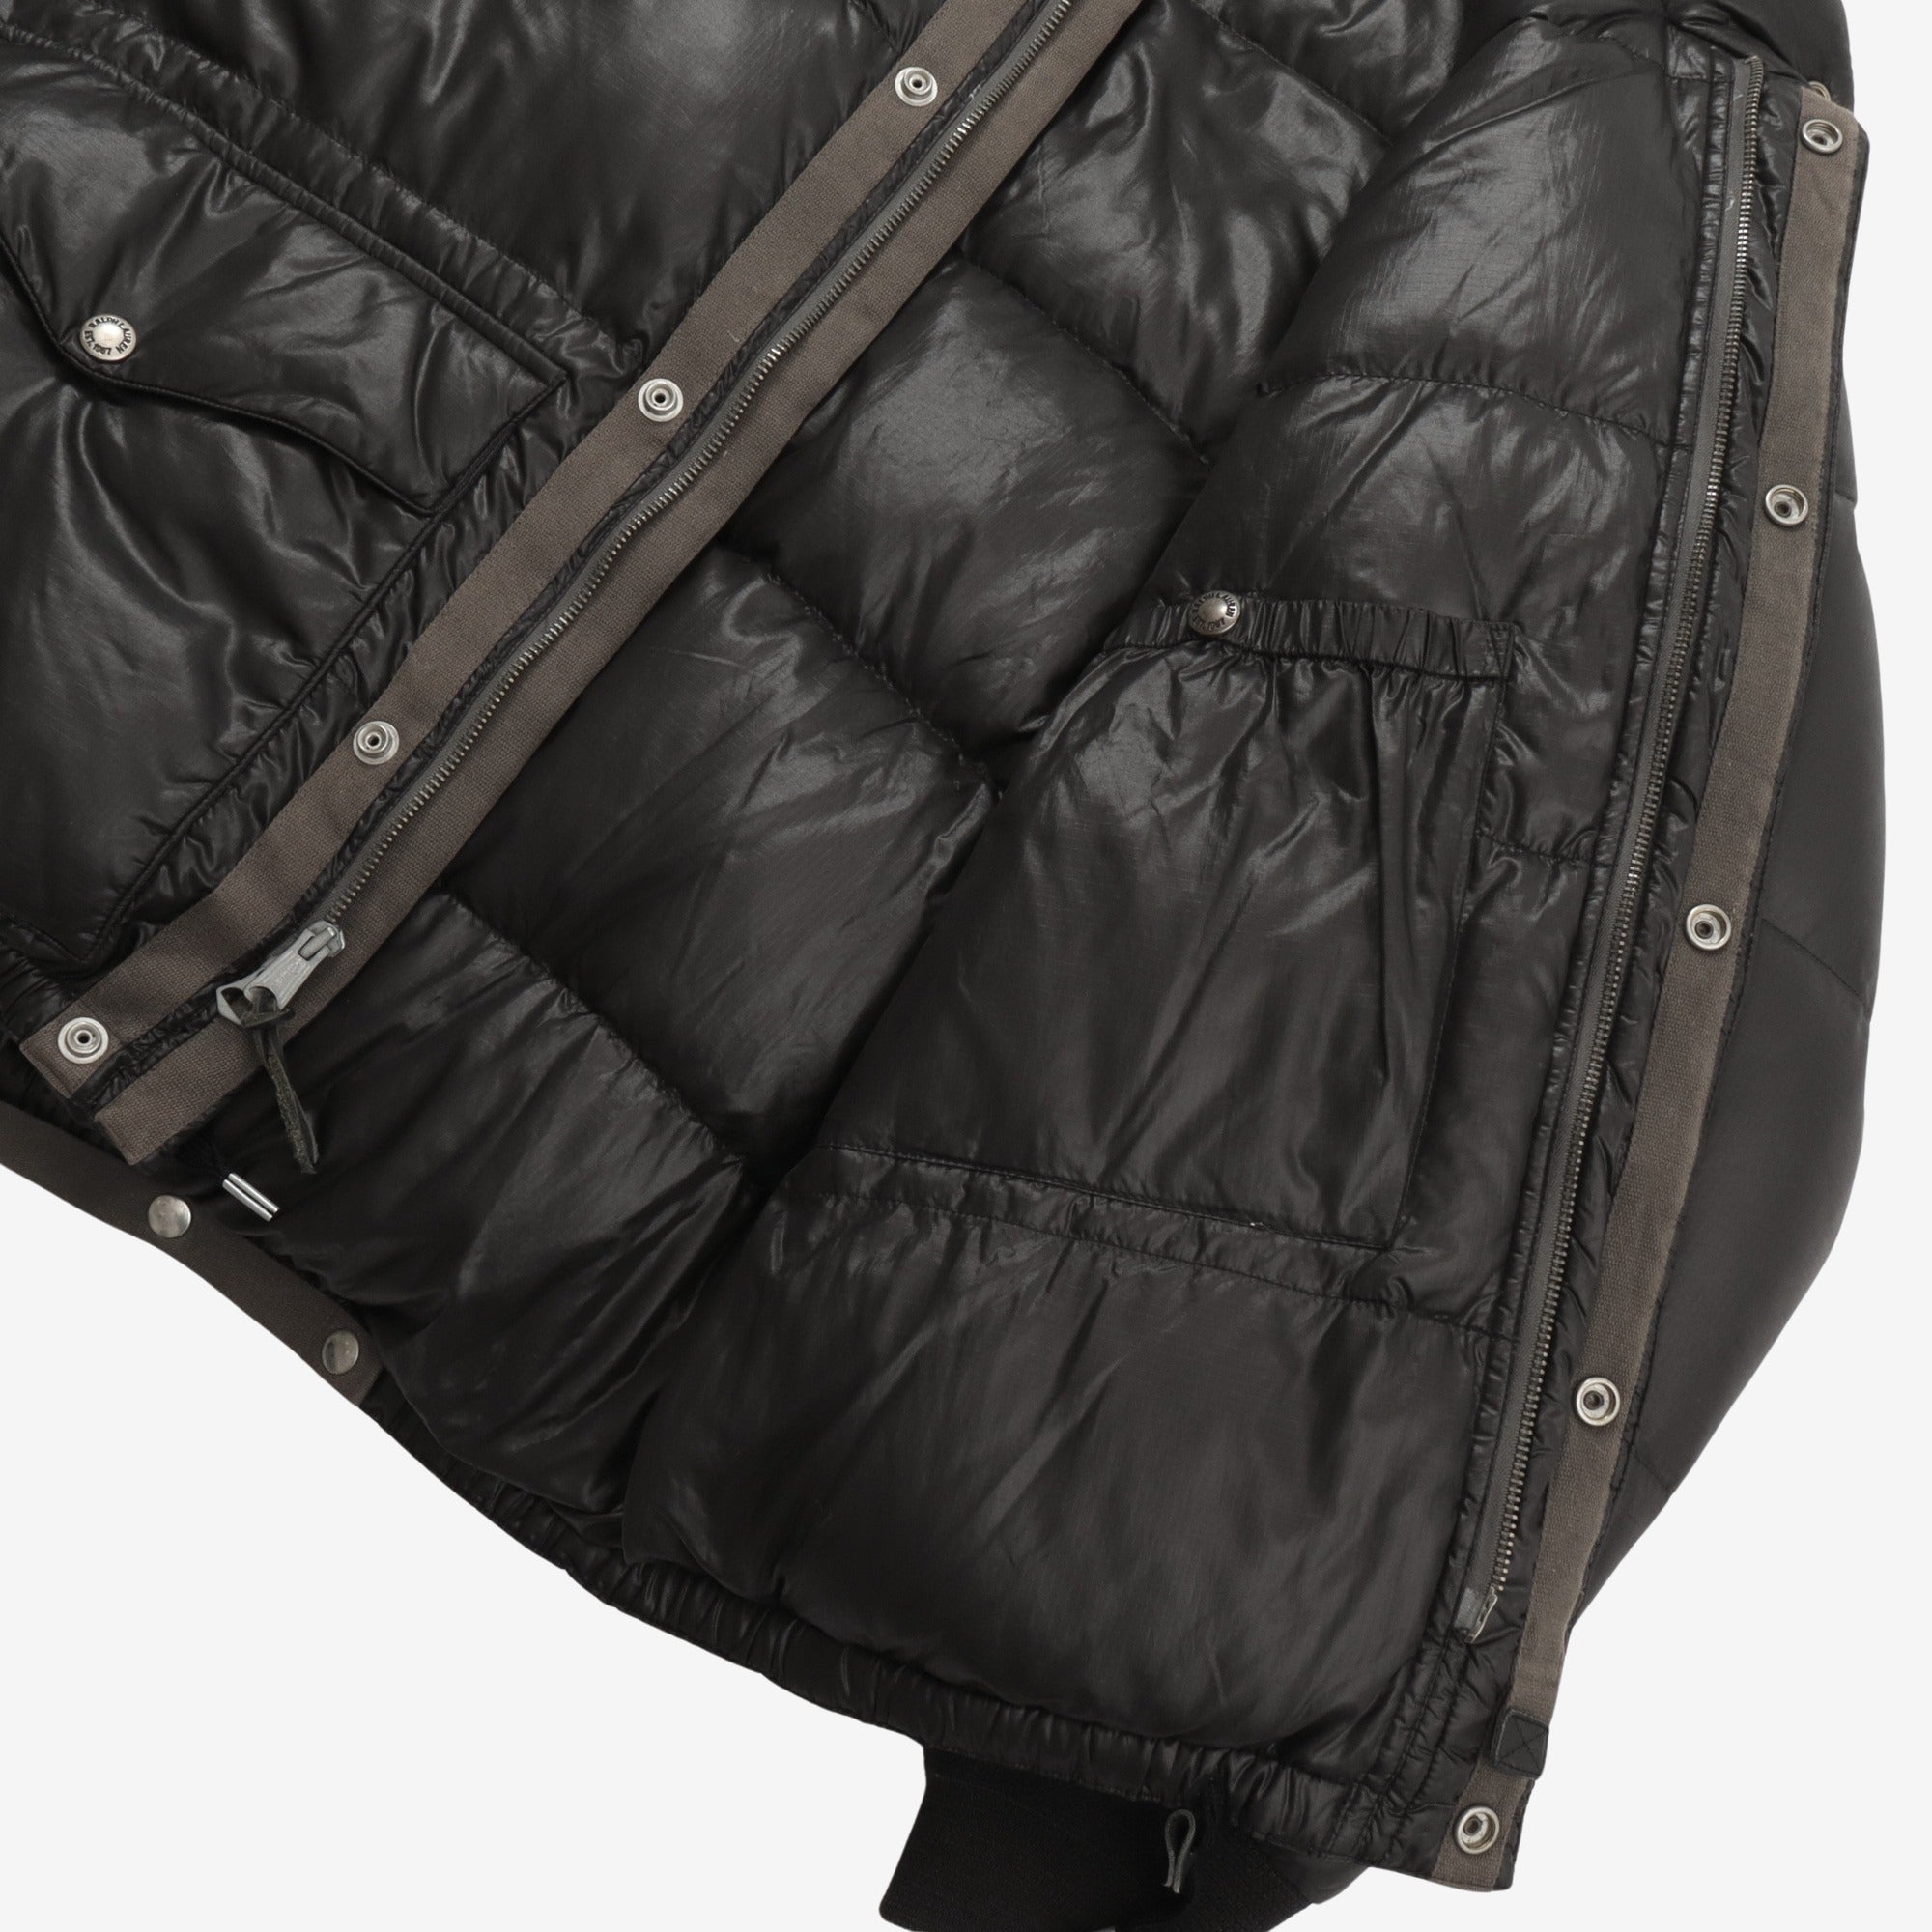 Black Gold Mountaineering Down Jacket